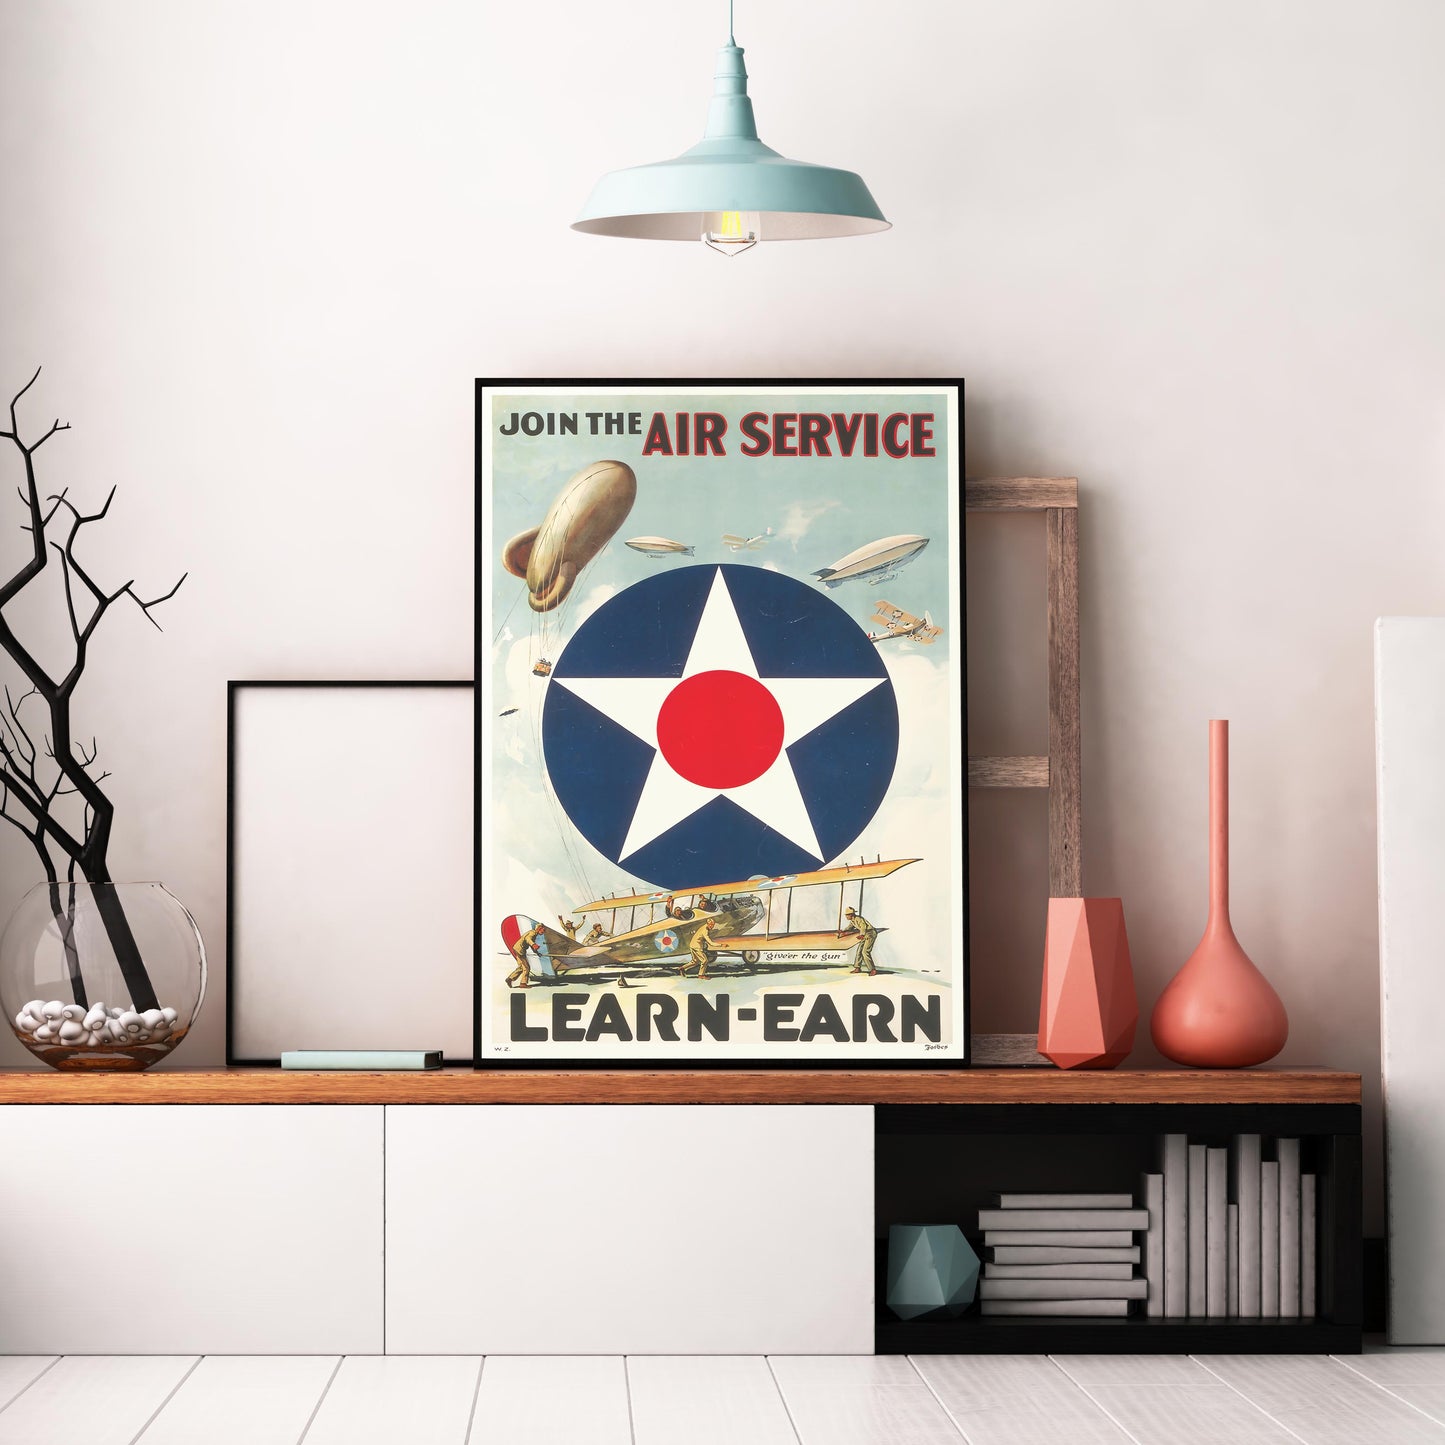 Join the Air Service, Learn-Earn / American recruitment poster